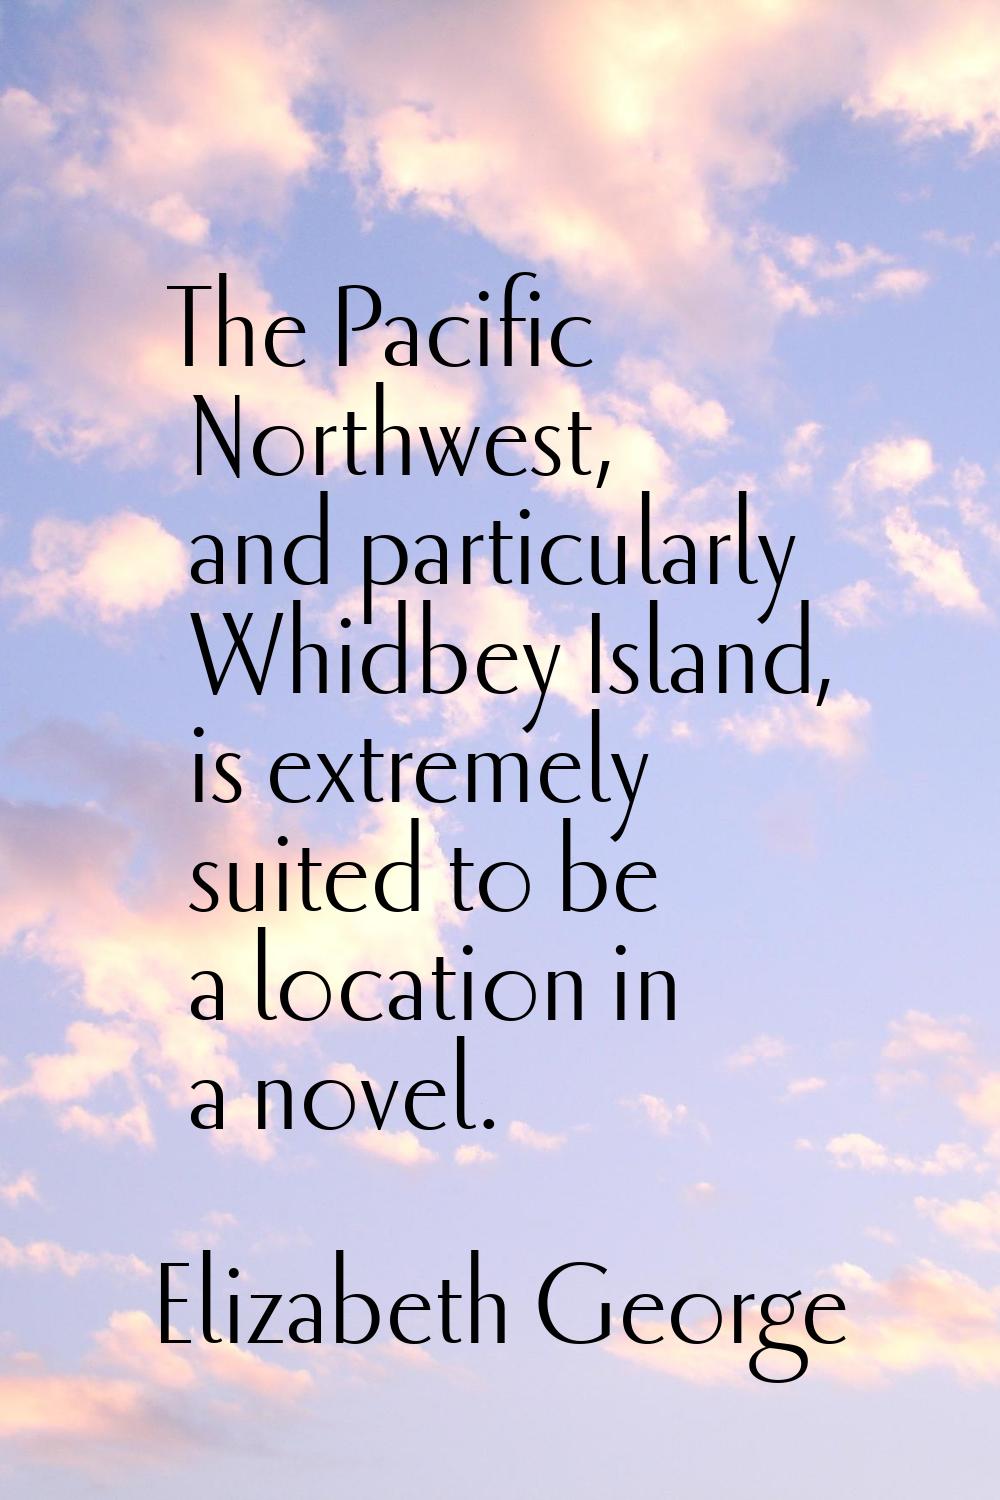 The Pacific Northwest, and particularly Whidbey Island, is extremely suited to be a location in a n